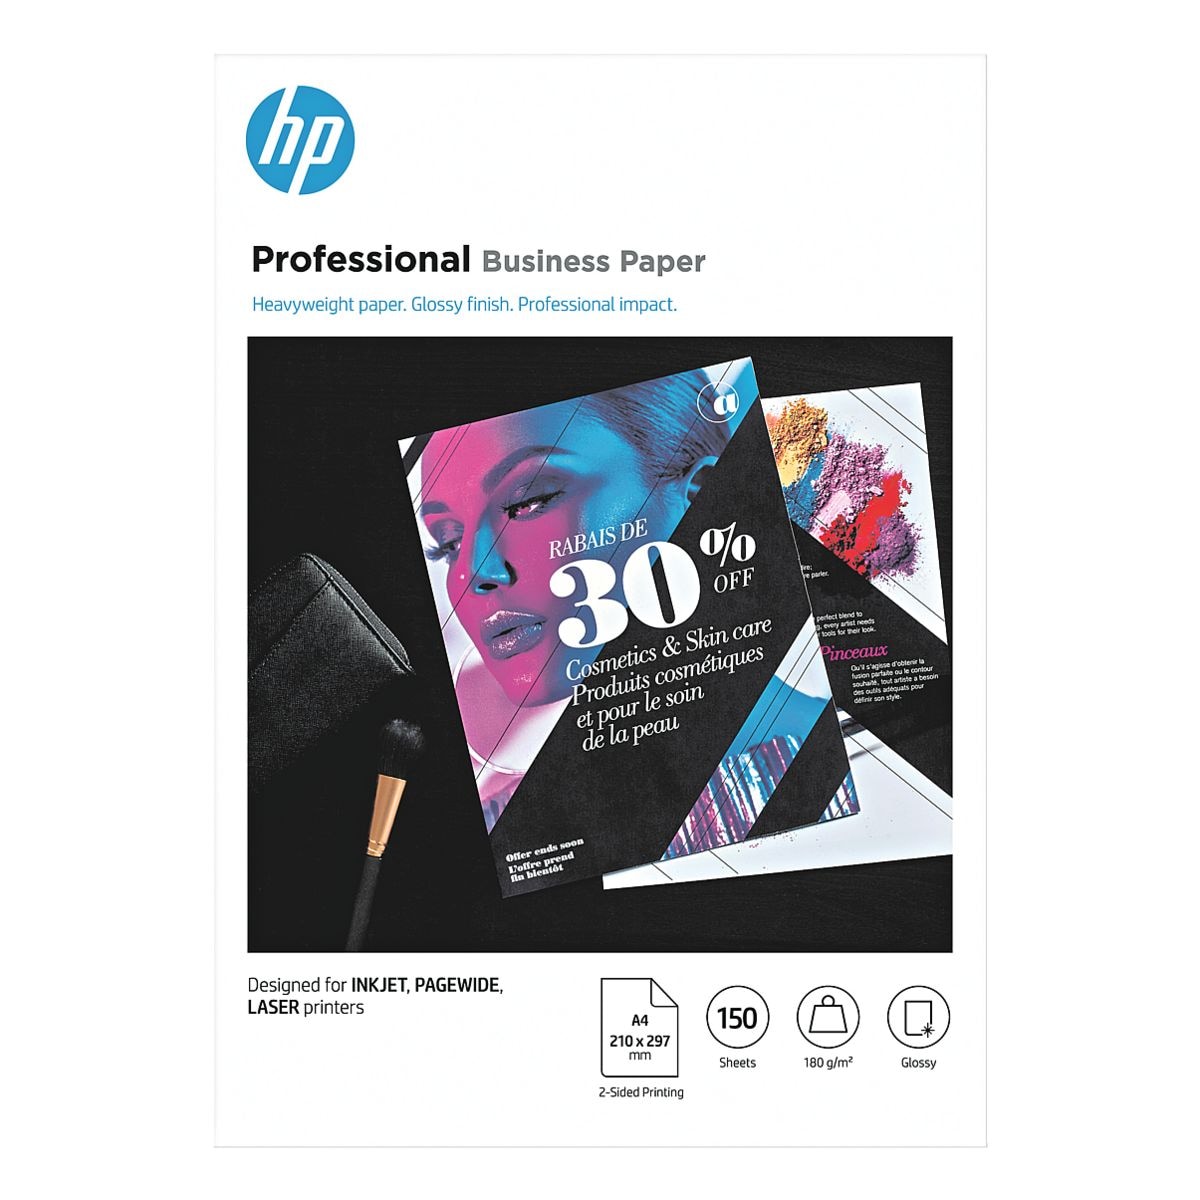 HP Fotopapier Professional Business Paper - A4 glossy